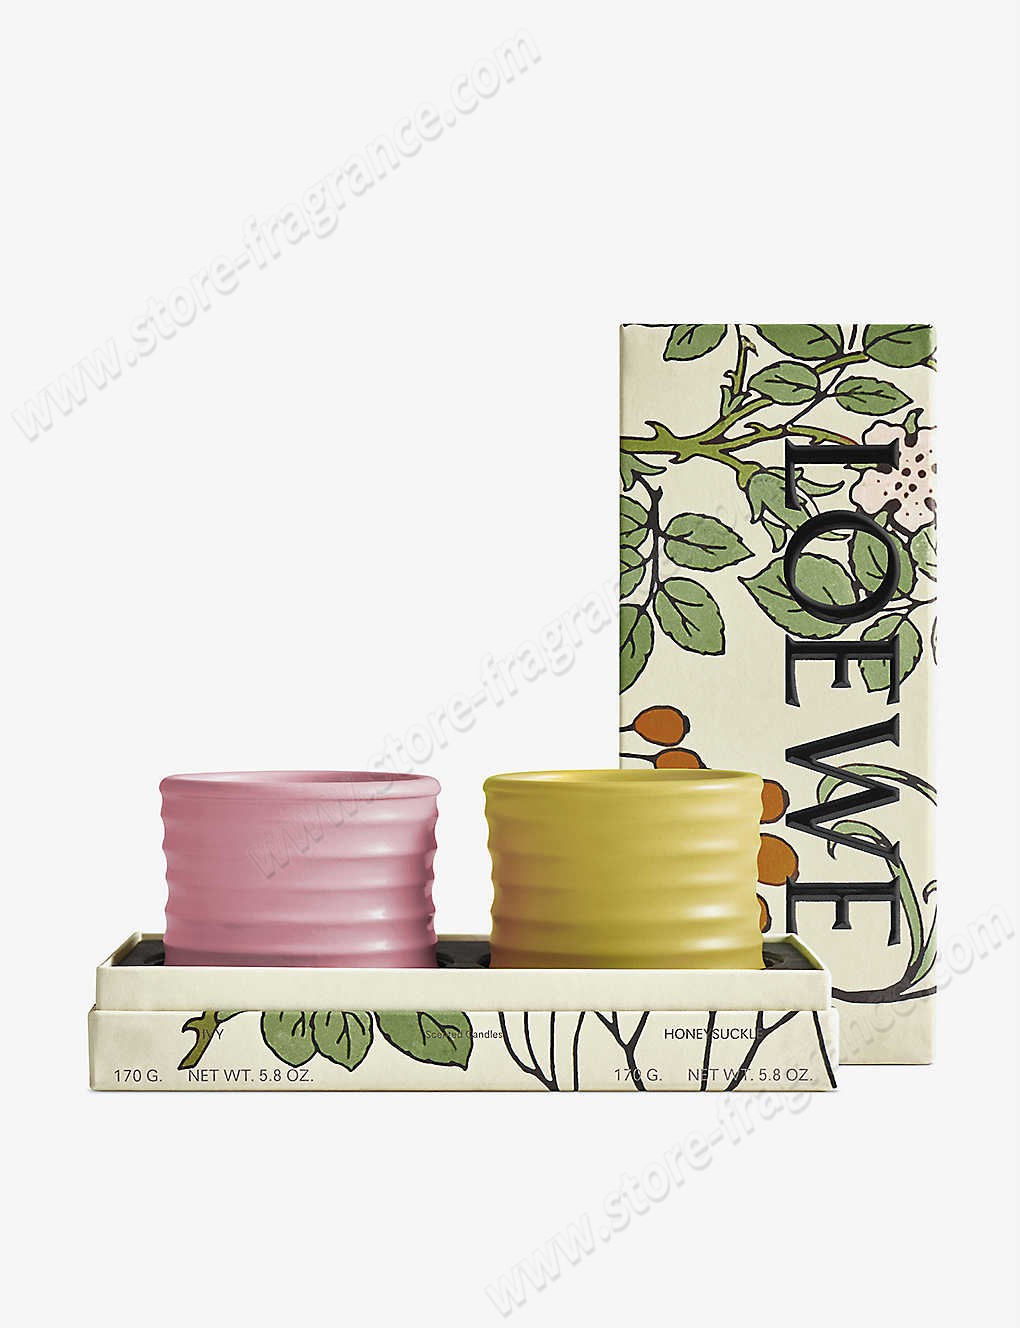 LOEWE/Honeysuckle and Ivy scented candle gift set Limit Offer - -0